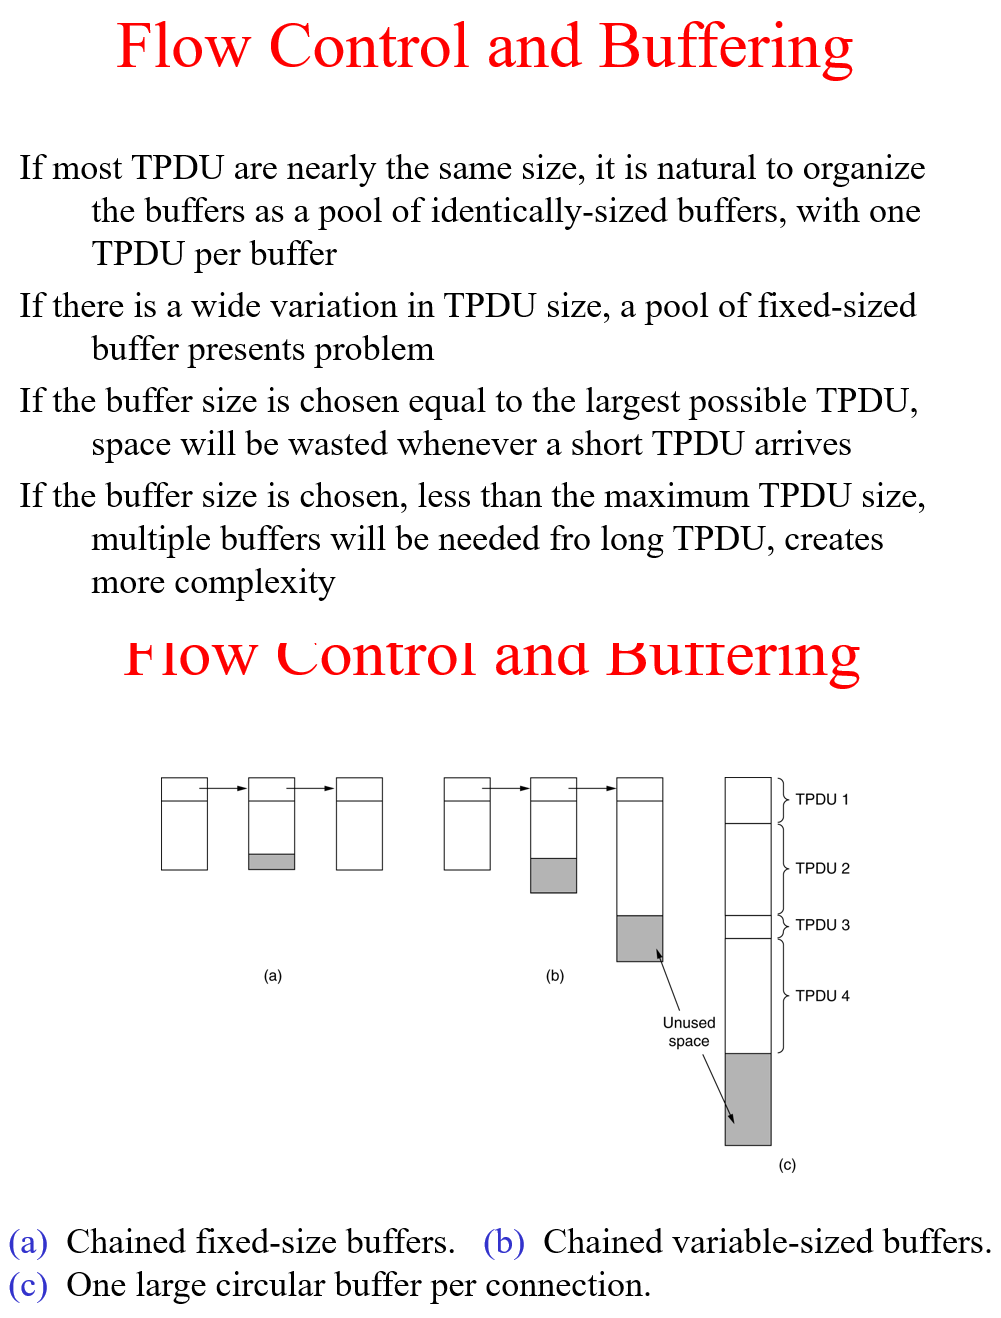 Flow Control and Buffering
If most TPDU are nearly the same size, it is natural to organize
the buffers as a pool of identically-sized buffers, with one
TPDU per buffer
If there is a wide variation in TPDU size, a pool of fixed-sized
buffer presents problem
If the buffer size is chosen equal to the largest possible TPDU,
space will be wasted whenever a short TPDU arrives
If the buffer size is chosen, less than the maximum TPDU size,
multiple buffers will be needed fro long TPDU, creates
more complexity
Flow Control and Buffering
TPDU 1
TPDU 2
TPDU 3
(a)
(b)
TPDU 4
Unused
space
(c)
(a) Chained fixed-size buffers. (b) Chained variable-sized buffers.
(c) One large circular buffer per connection.
